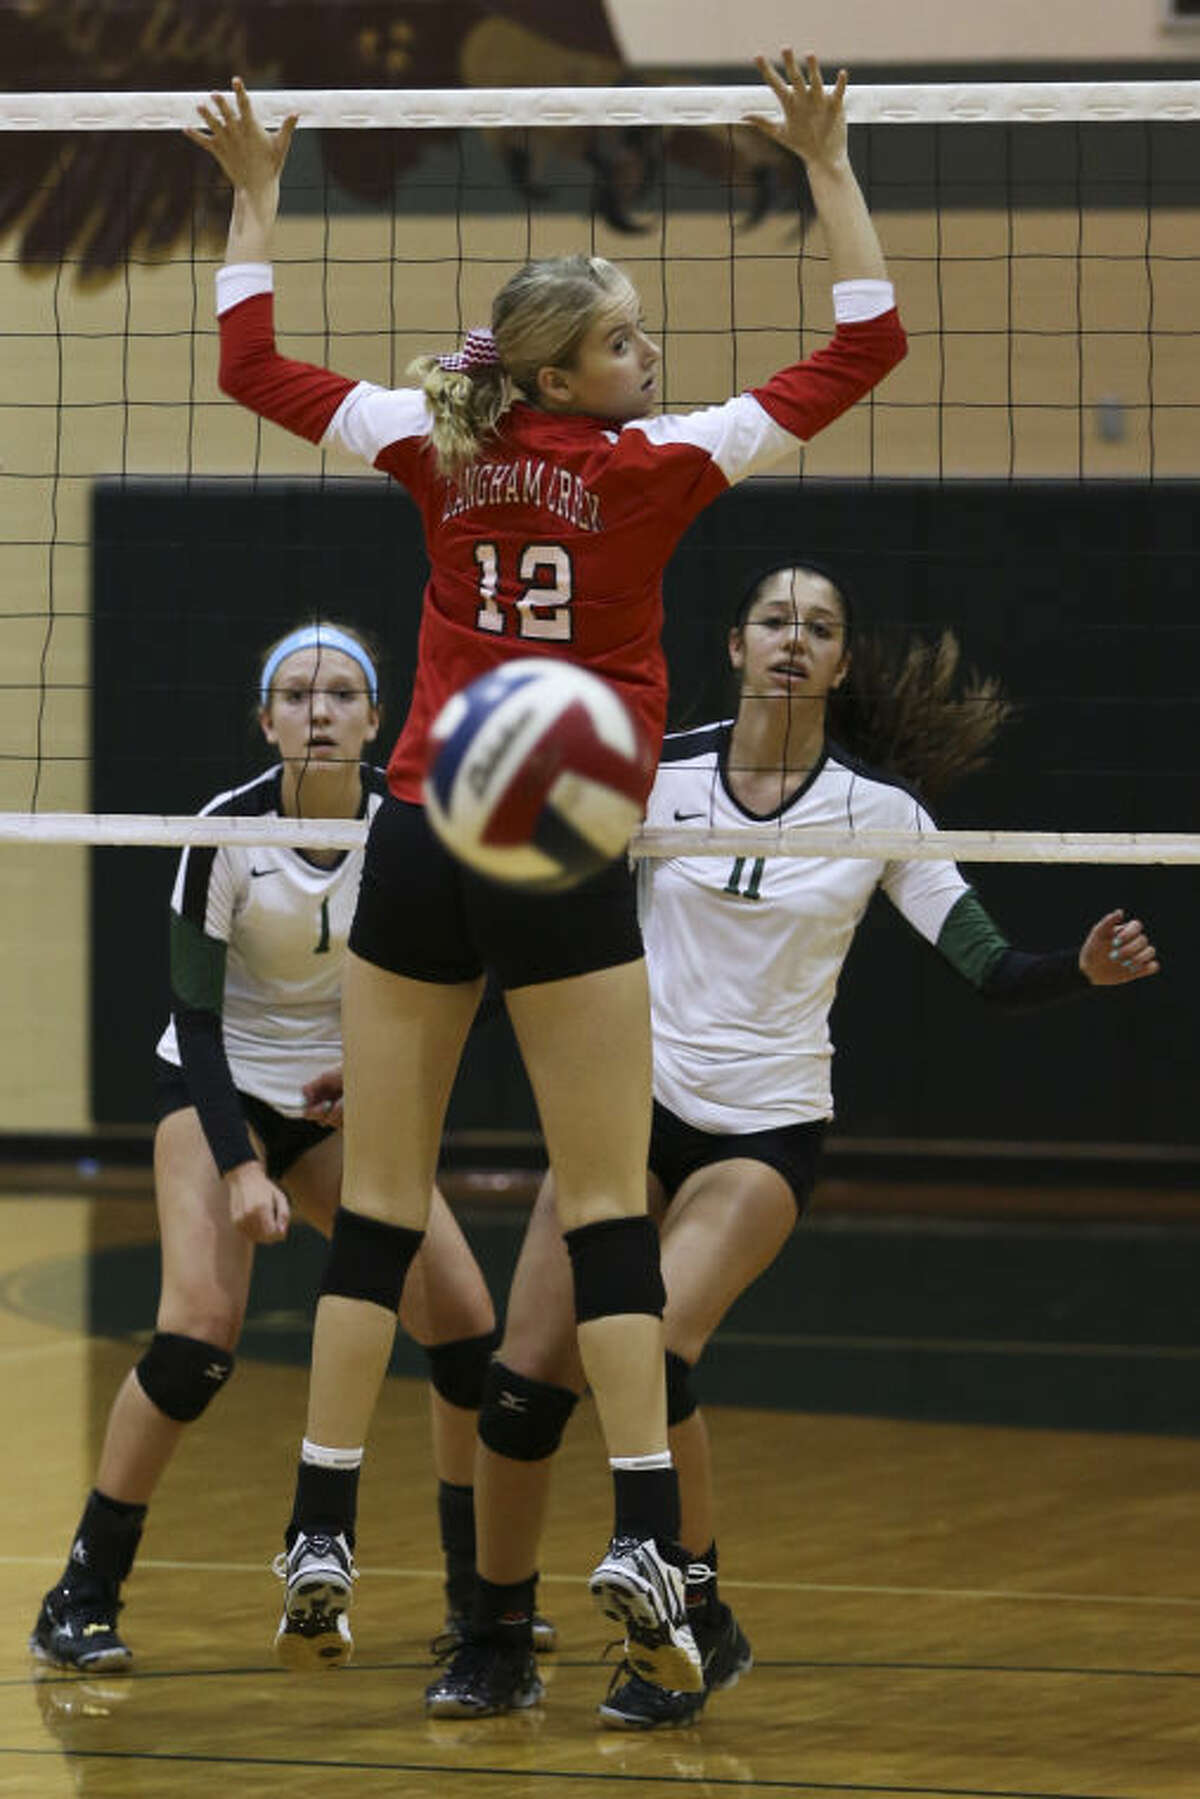 Langham Creek's Lauren Skrobarcyzk glances back at the ball during the Lobos' volleyball match against Cy Falls on Wednesday at Cy Falls High School. Cy Falls won, 3-0. (Michael Minasi / HCN)